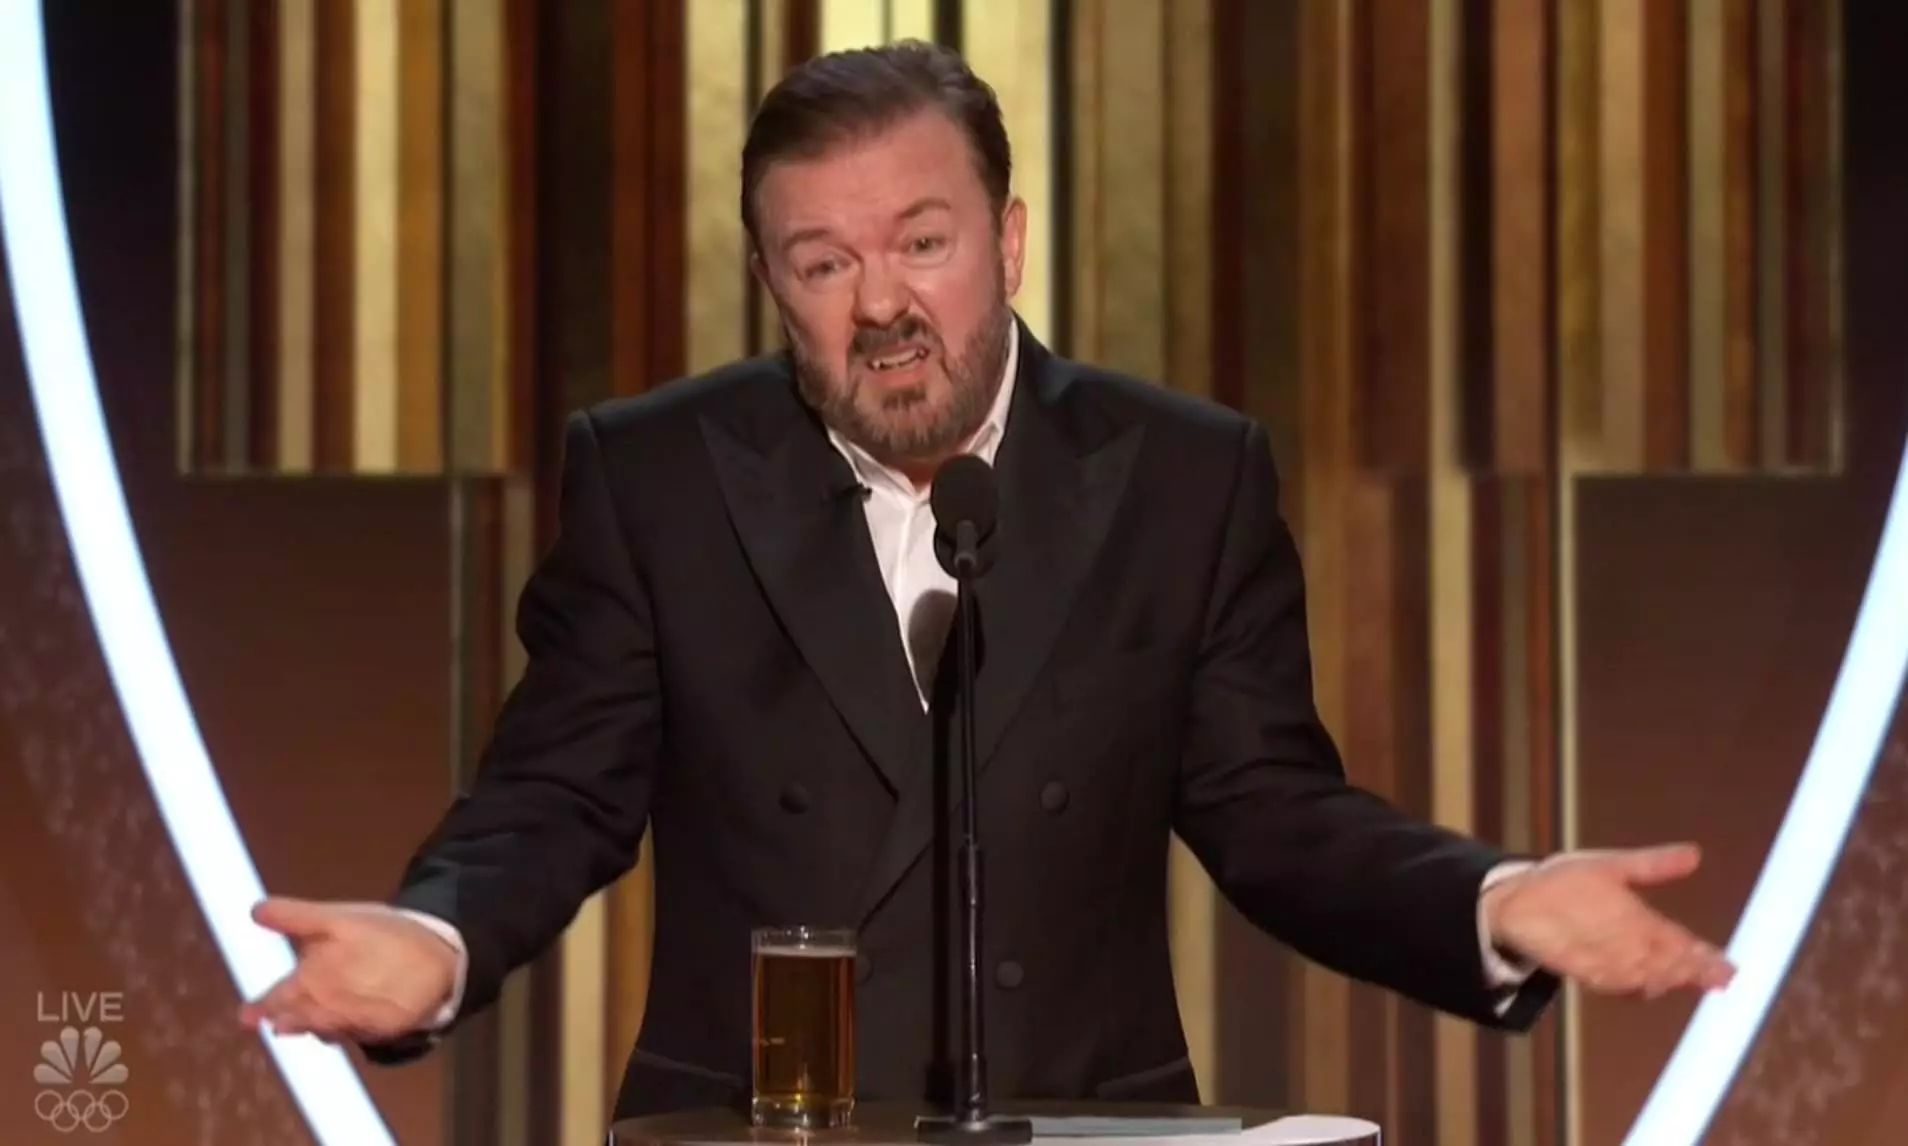 Ricky Gervais made a dig at lack of female nominees at the Golden Globes (